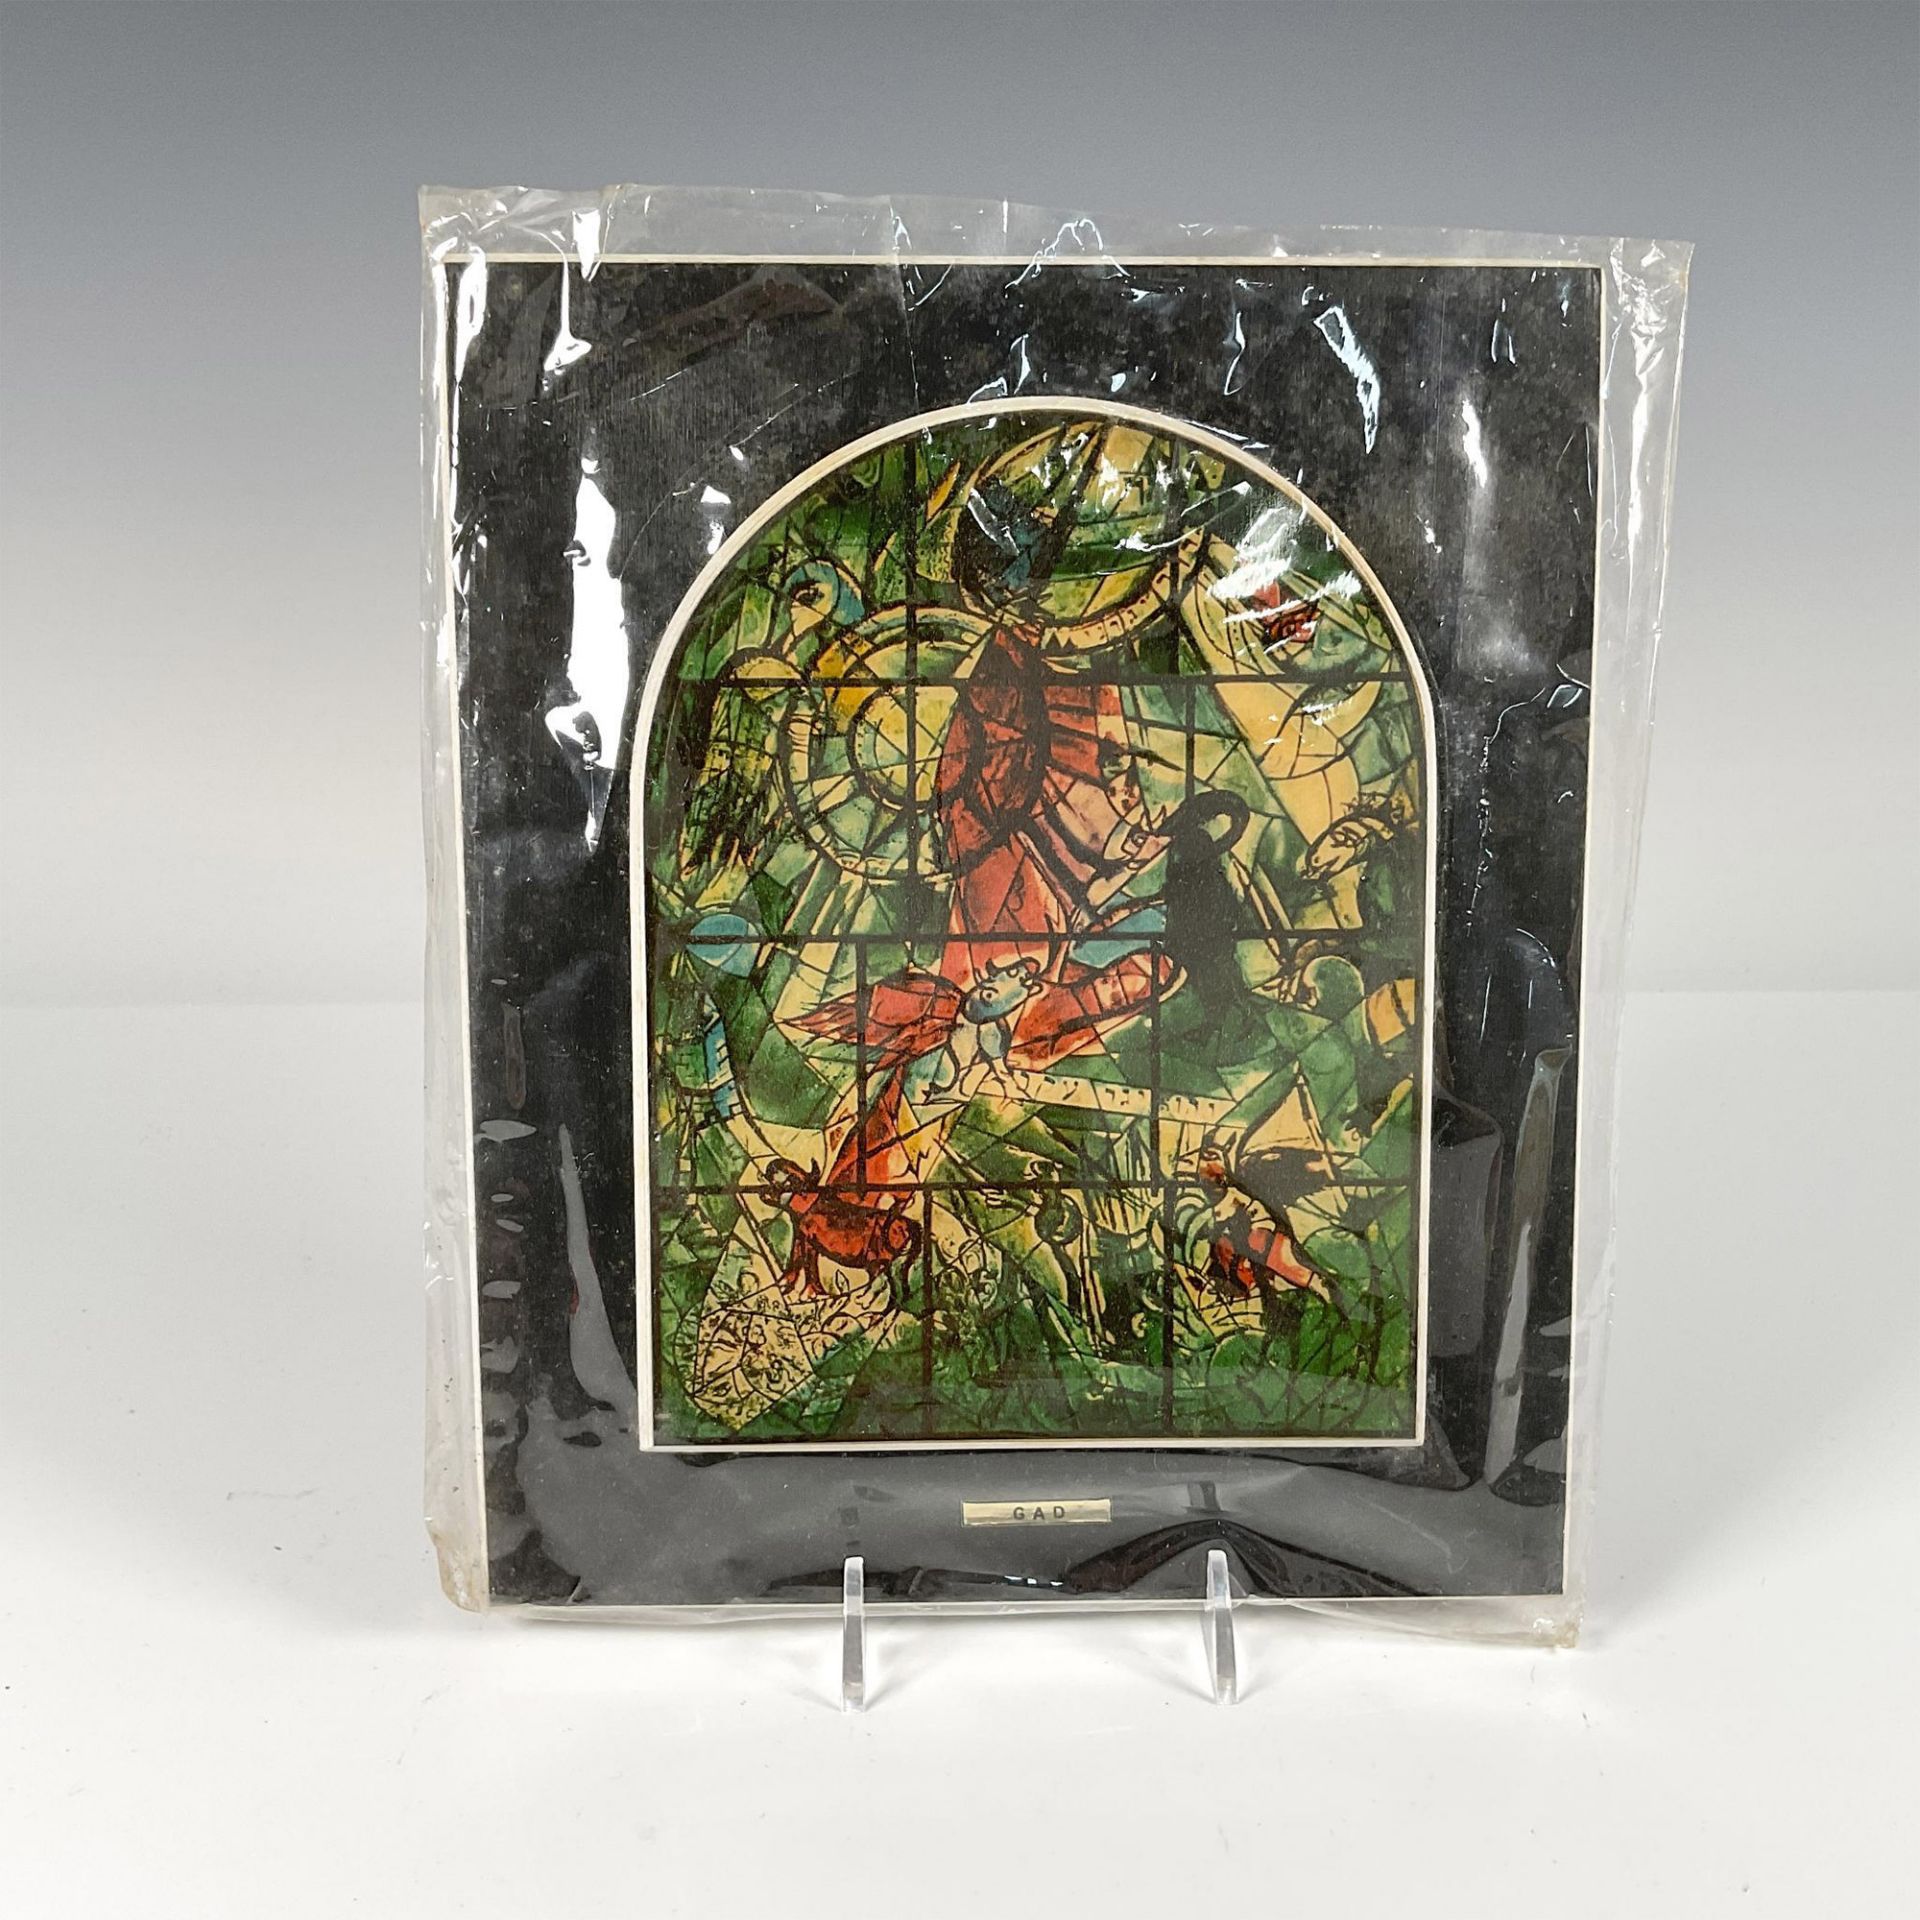 13pc After Marc Chagall by Avissar Wooden Plaques, The 12 Stained Glass Windows - Bild 16 aus 20